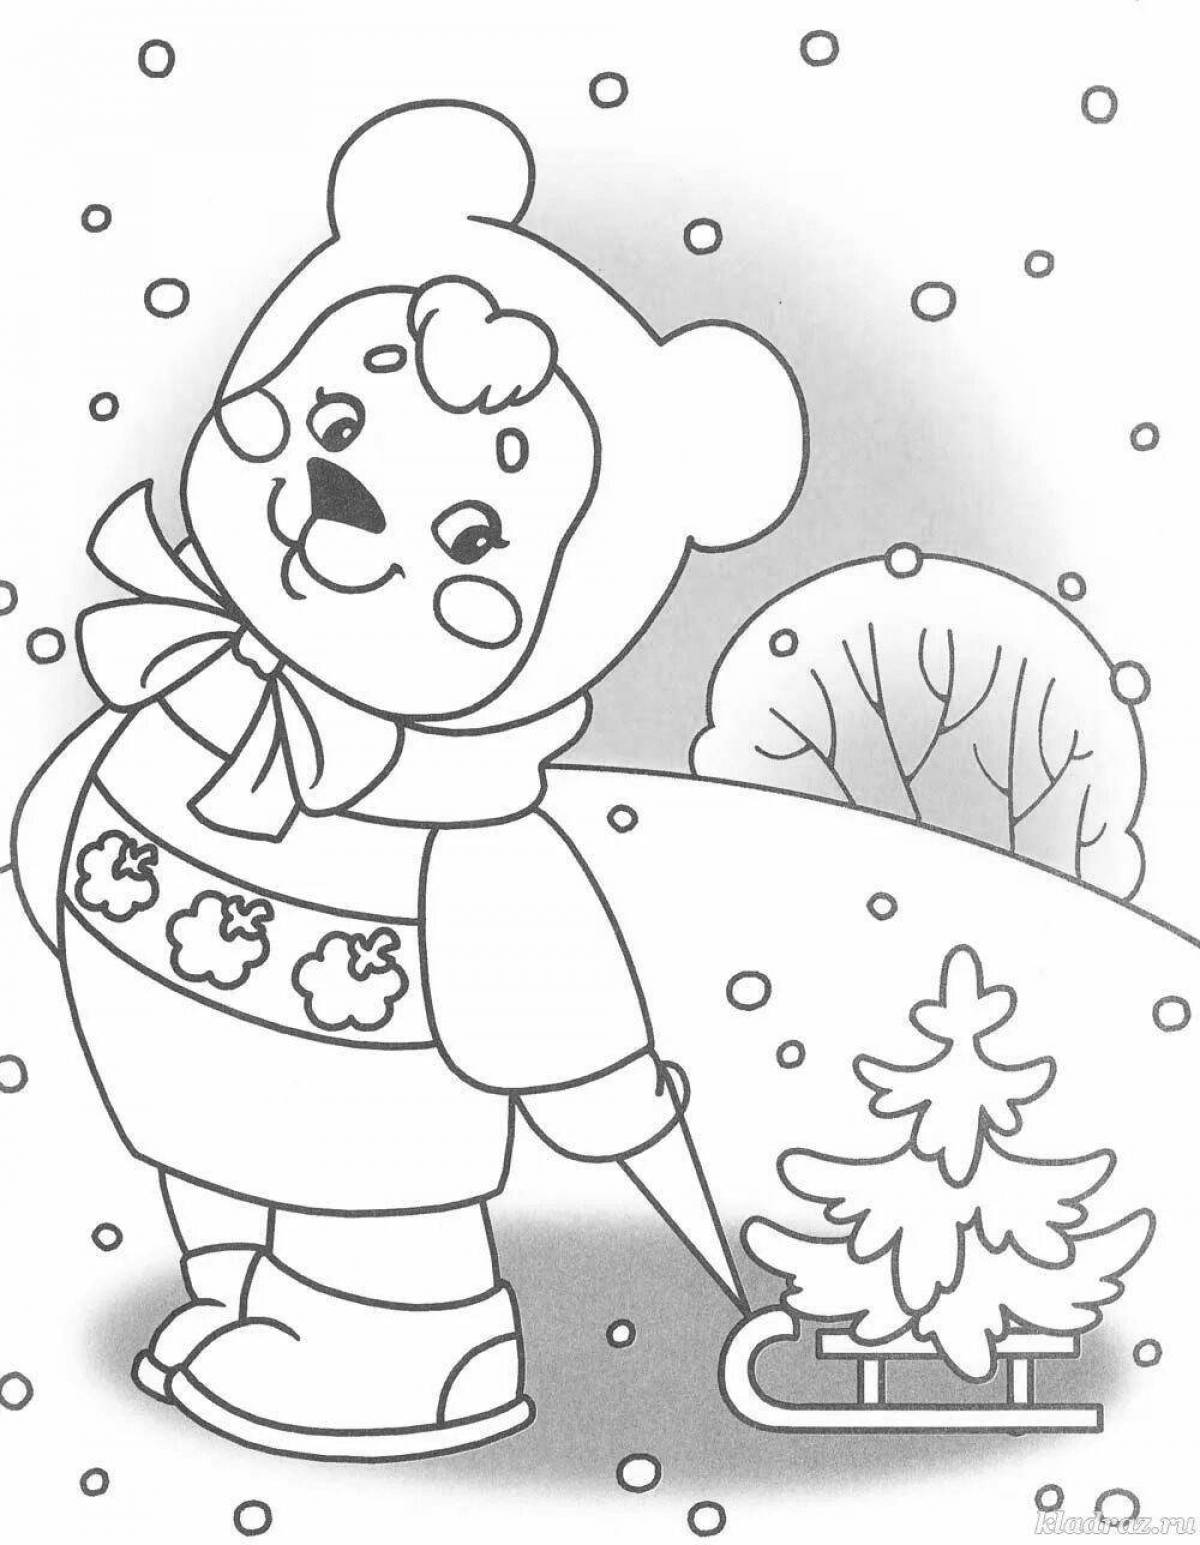 Bright winter coloring book for children 2-3 years old